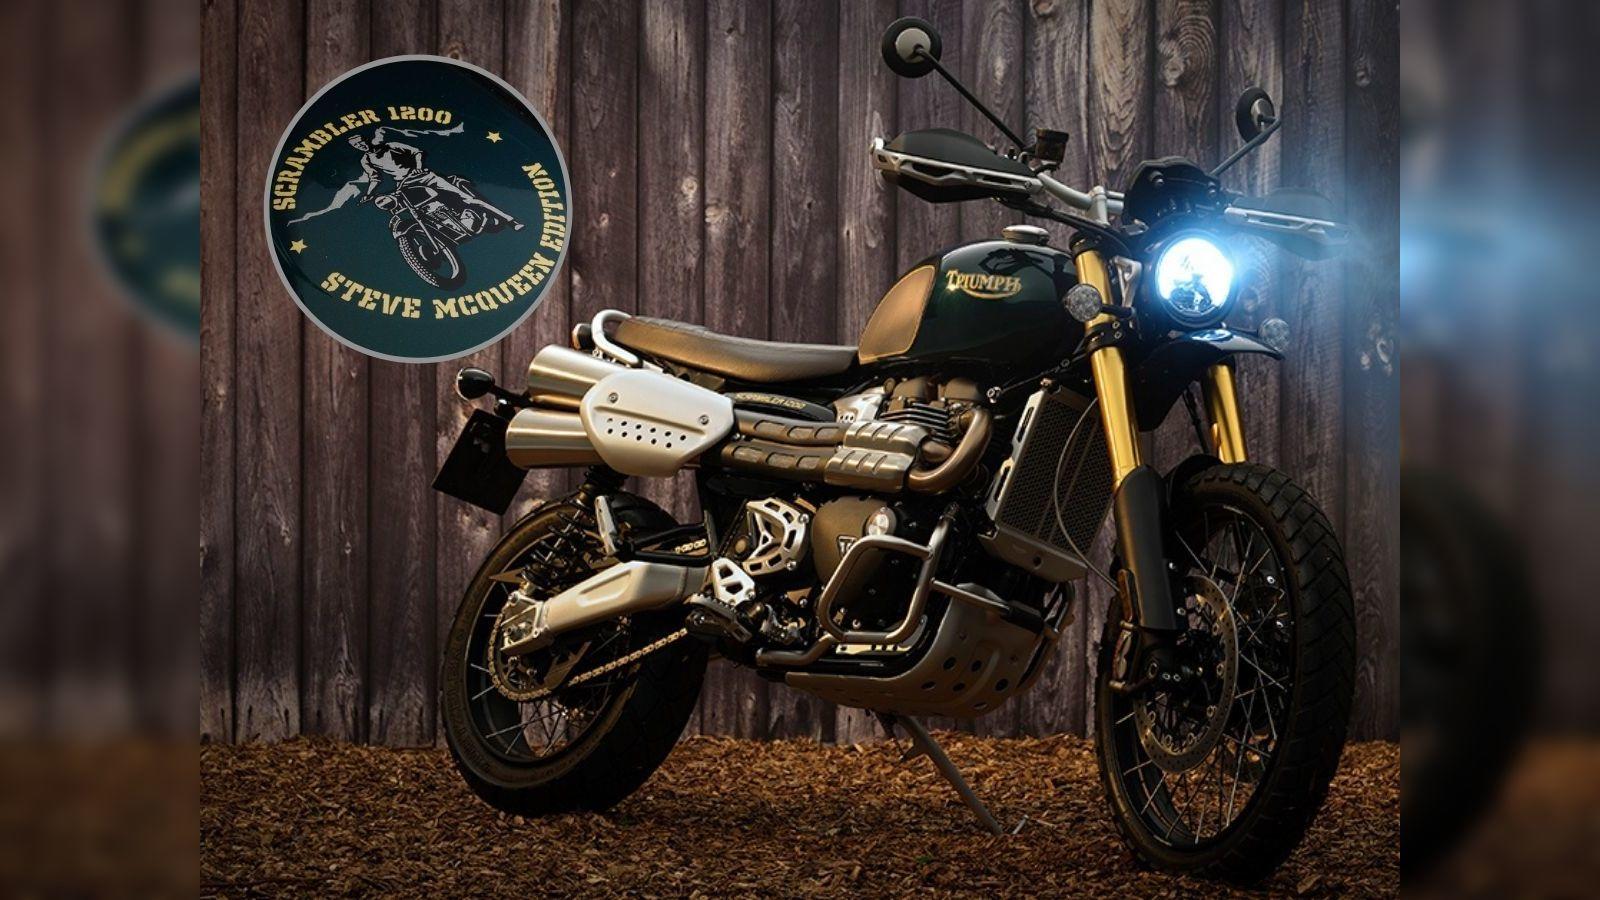 Triumph unveils special edition Scrambler 1200 Steve McQueen in India at Rs  13.75 lakh - The Economic Times